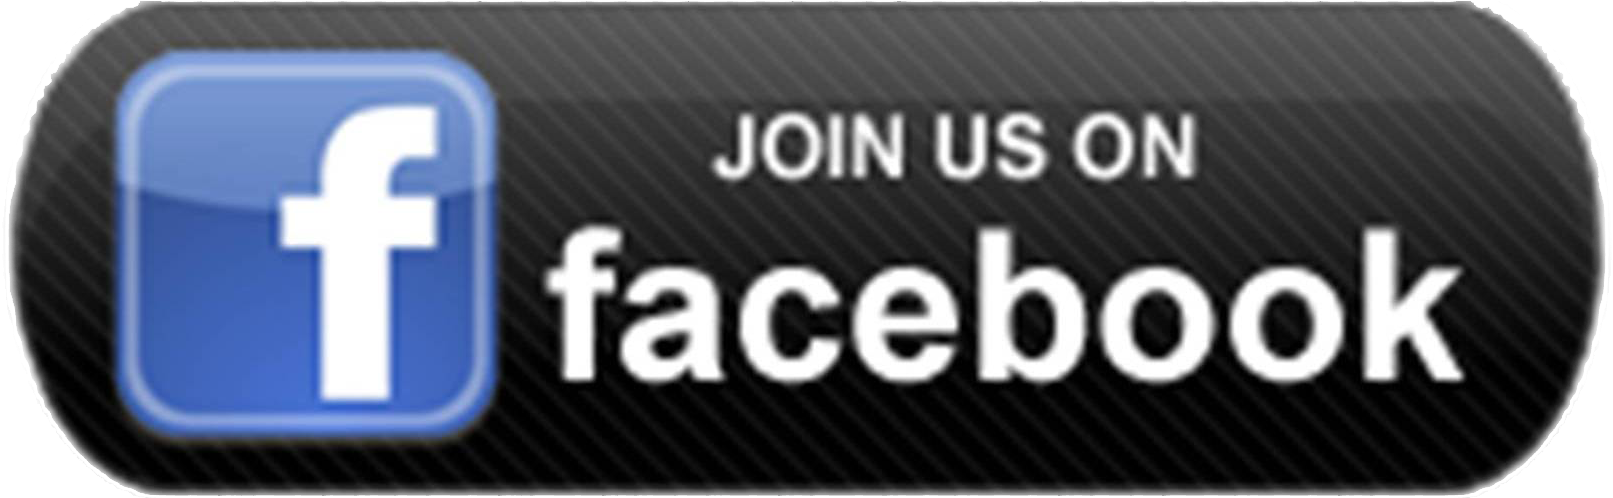 Facebook Logo With Text Saying "join Us On Facebook" - Wear Face Mask - Rpvc (300 X 100mm) (1631x541), Png Download